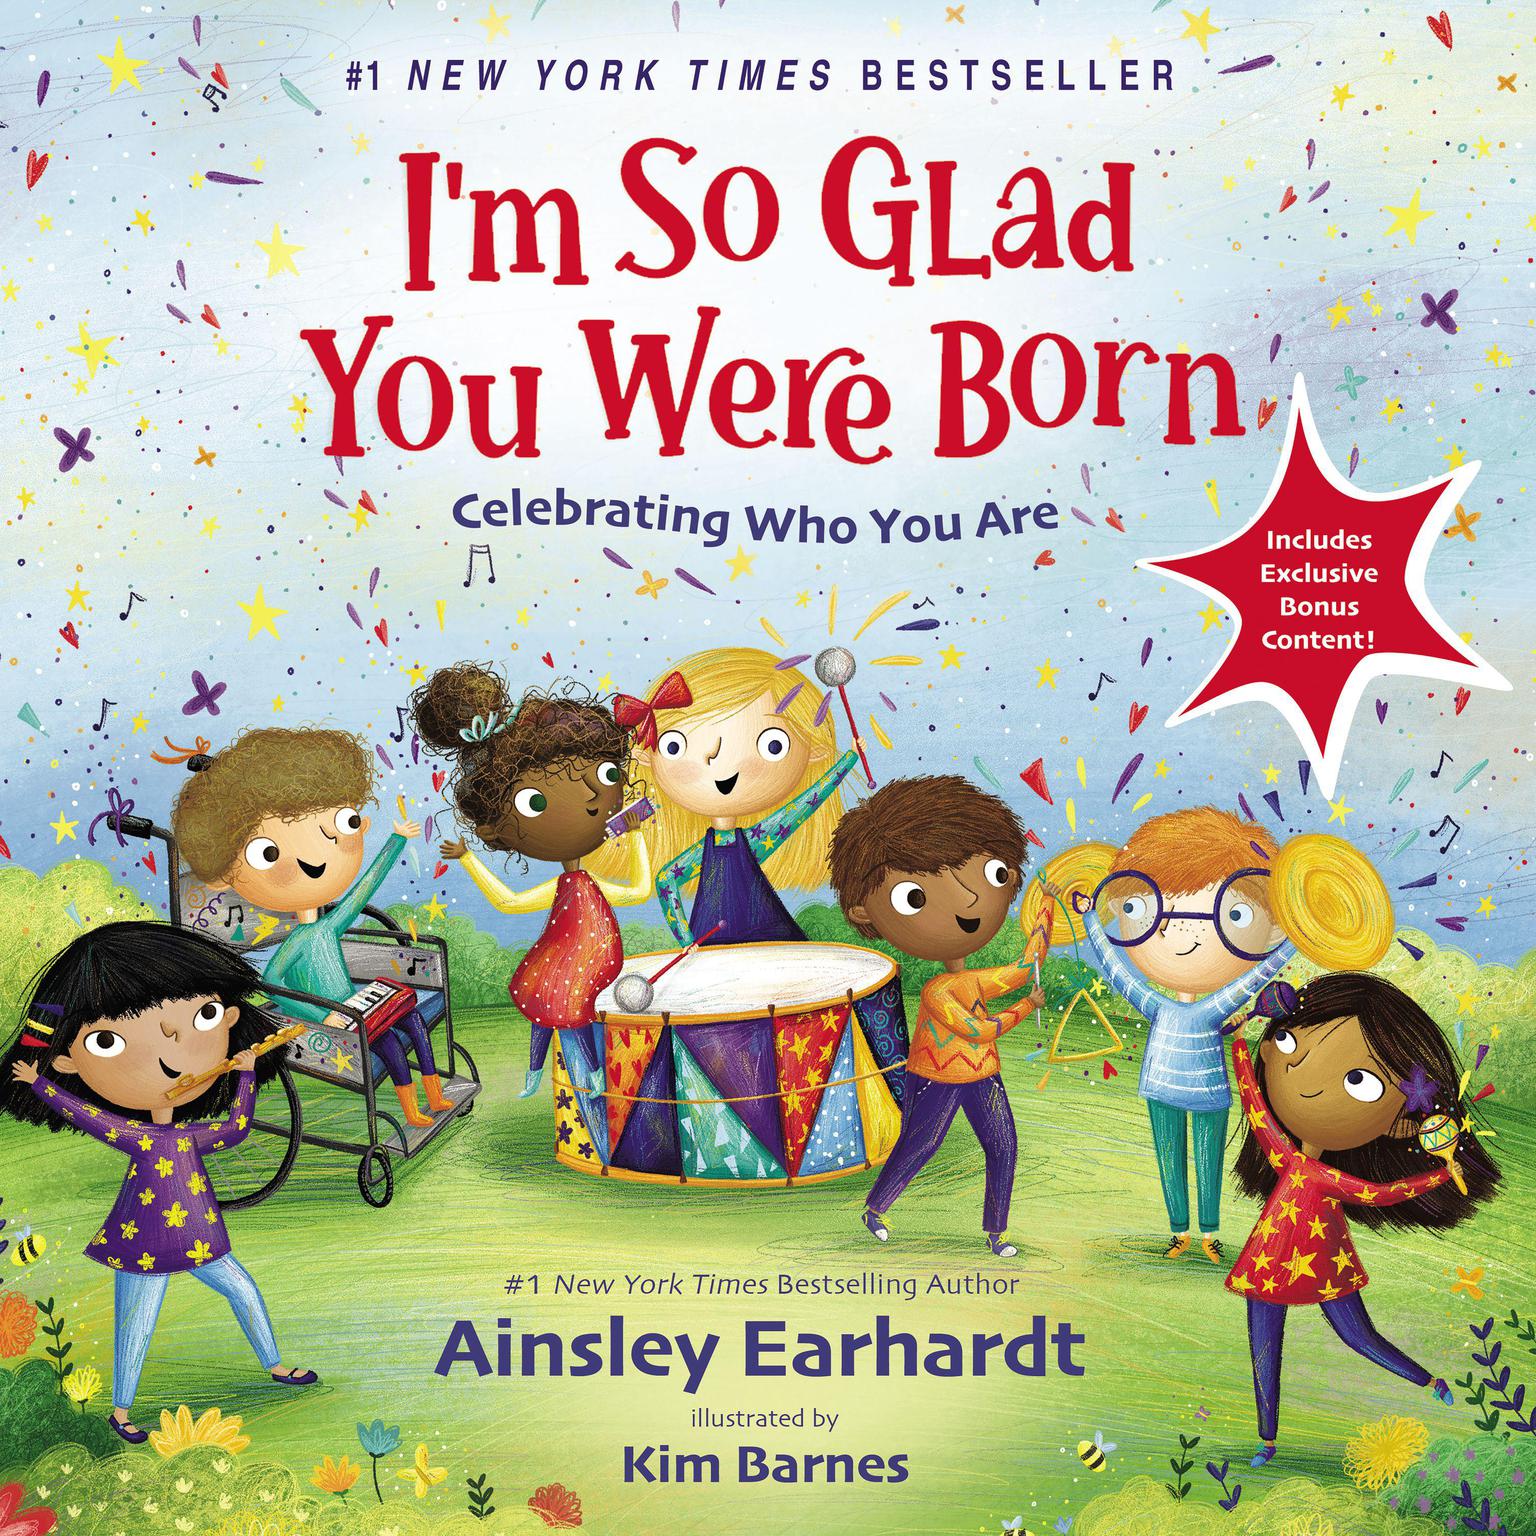 Im So Glad You Were Born: Celebrating Who You Are Audiobook, by Ainsley Earhardt